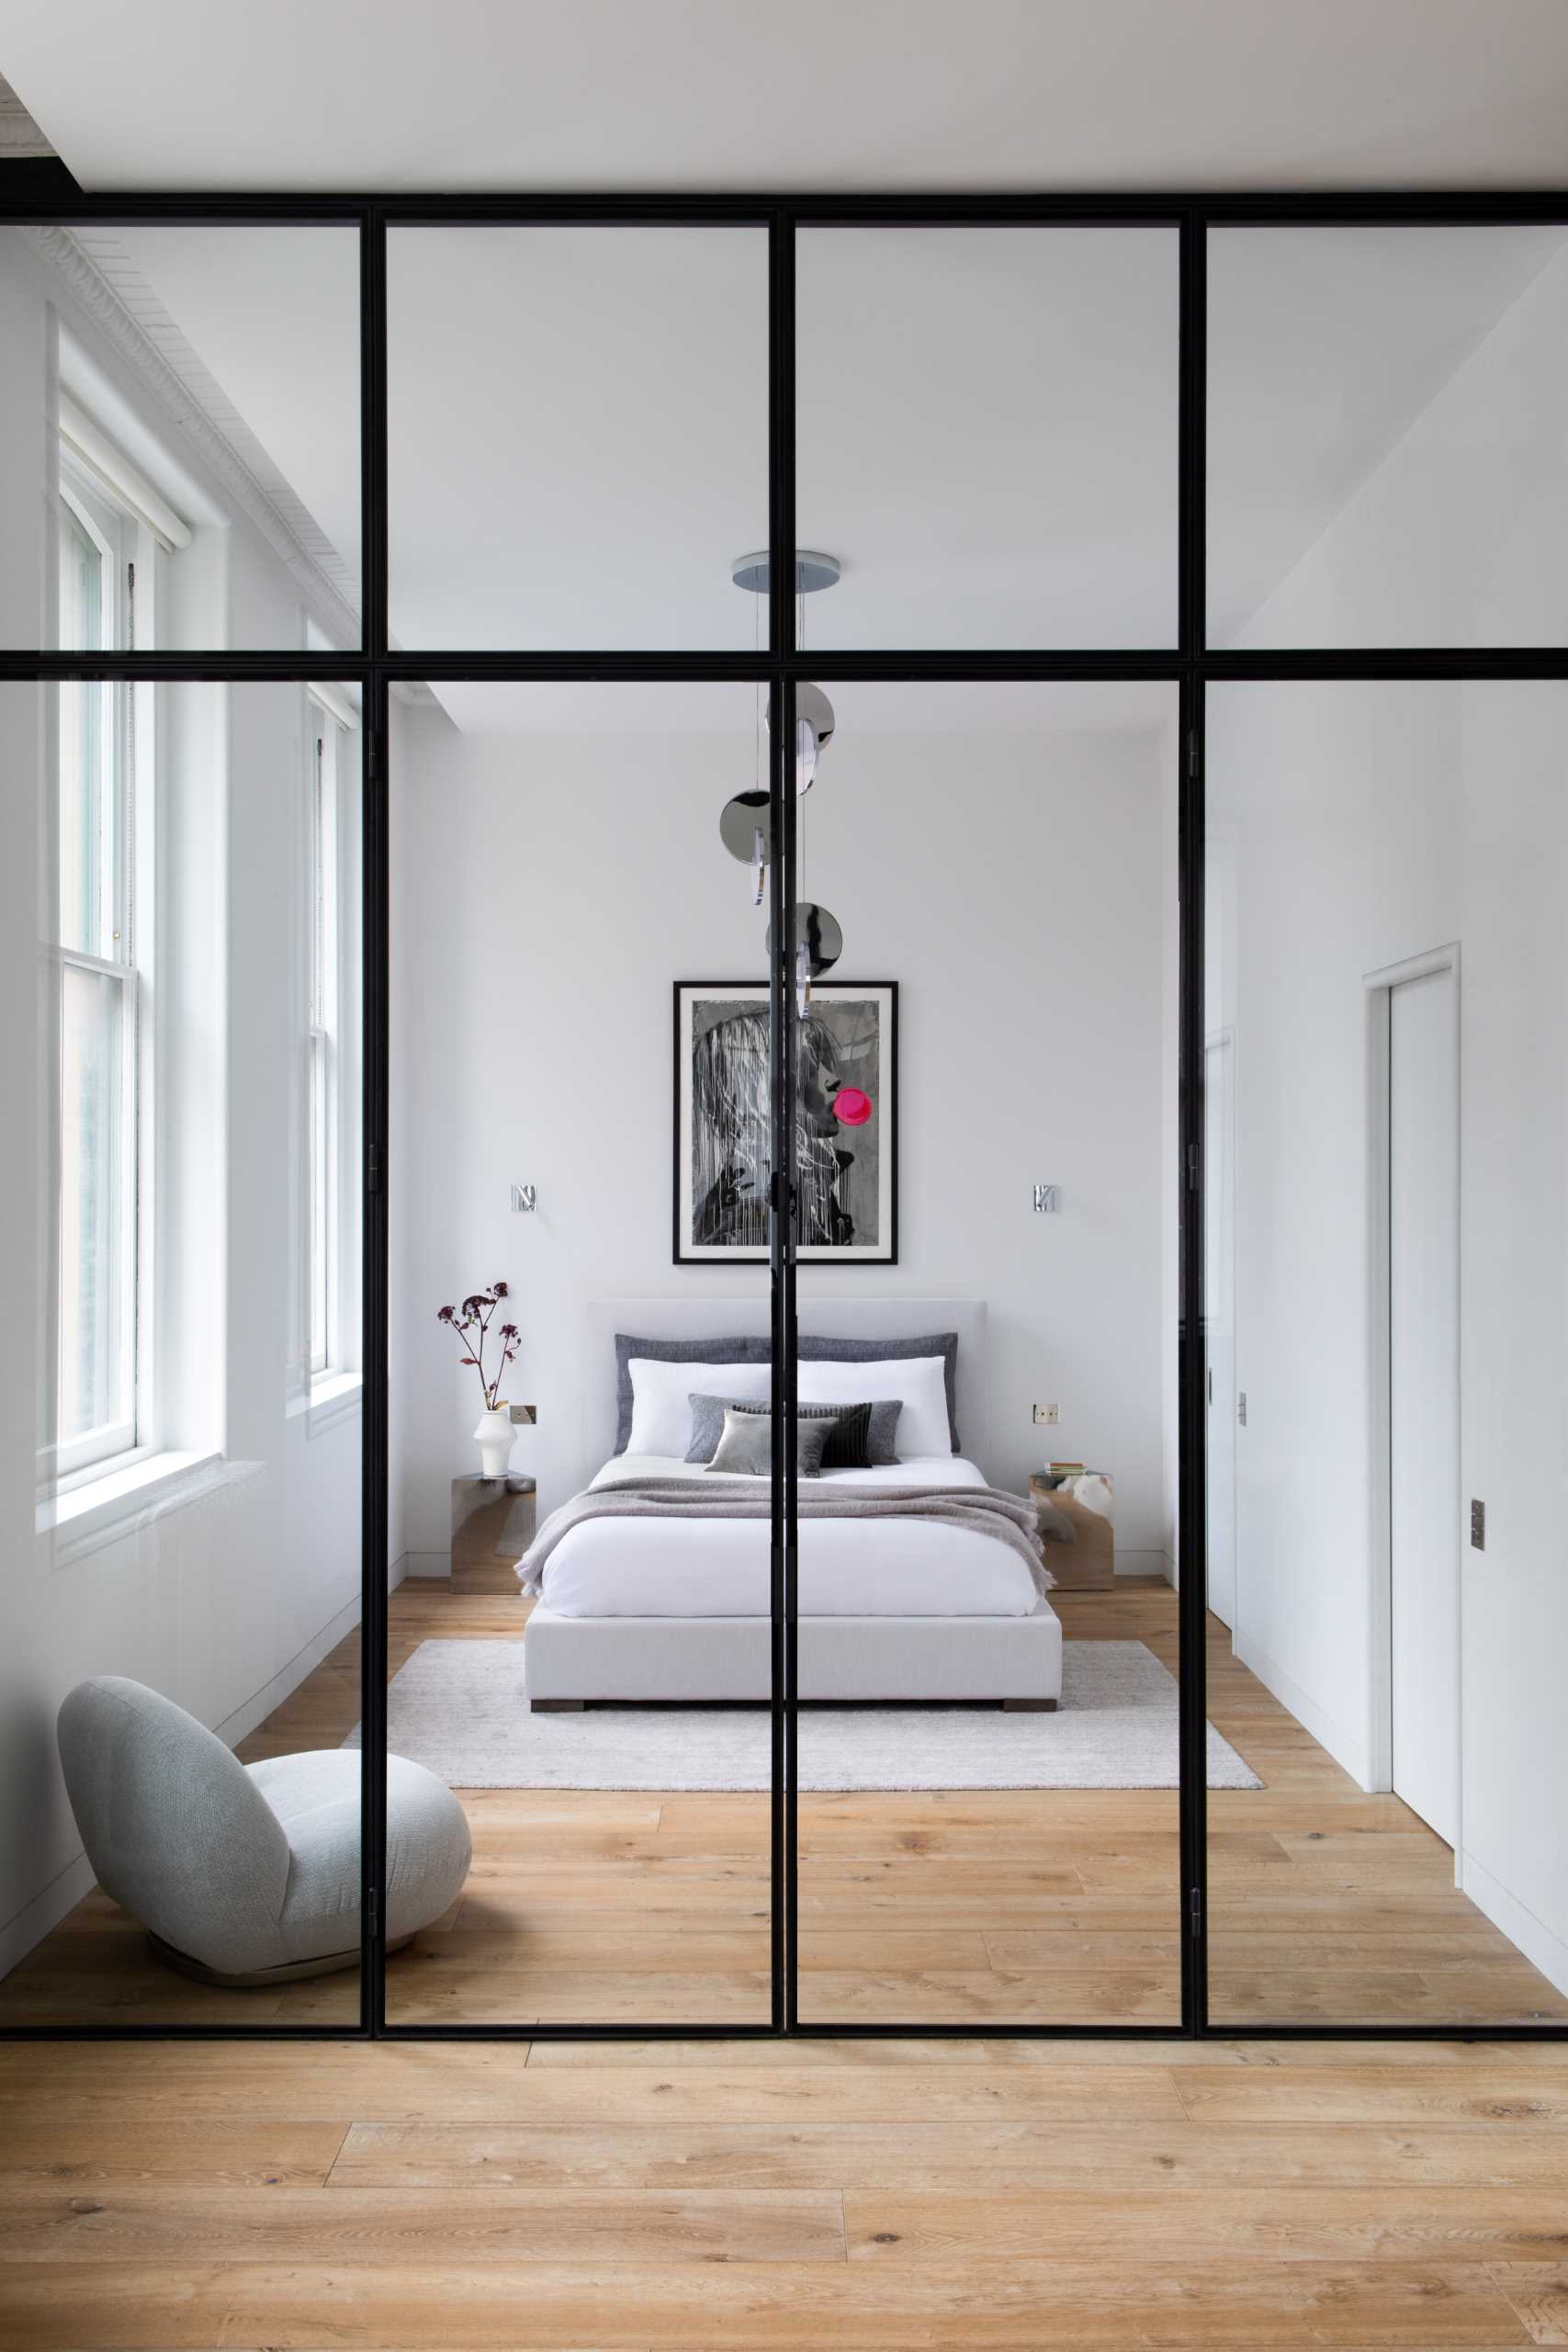 This modern bedroom, located by the windows, includes an Eclipse Chandelier by Lee Broom, a Pacha Lounge Chair by Pierre Paulin, and a Bubble Gum Girl Painting by Hijack.